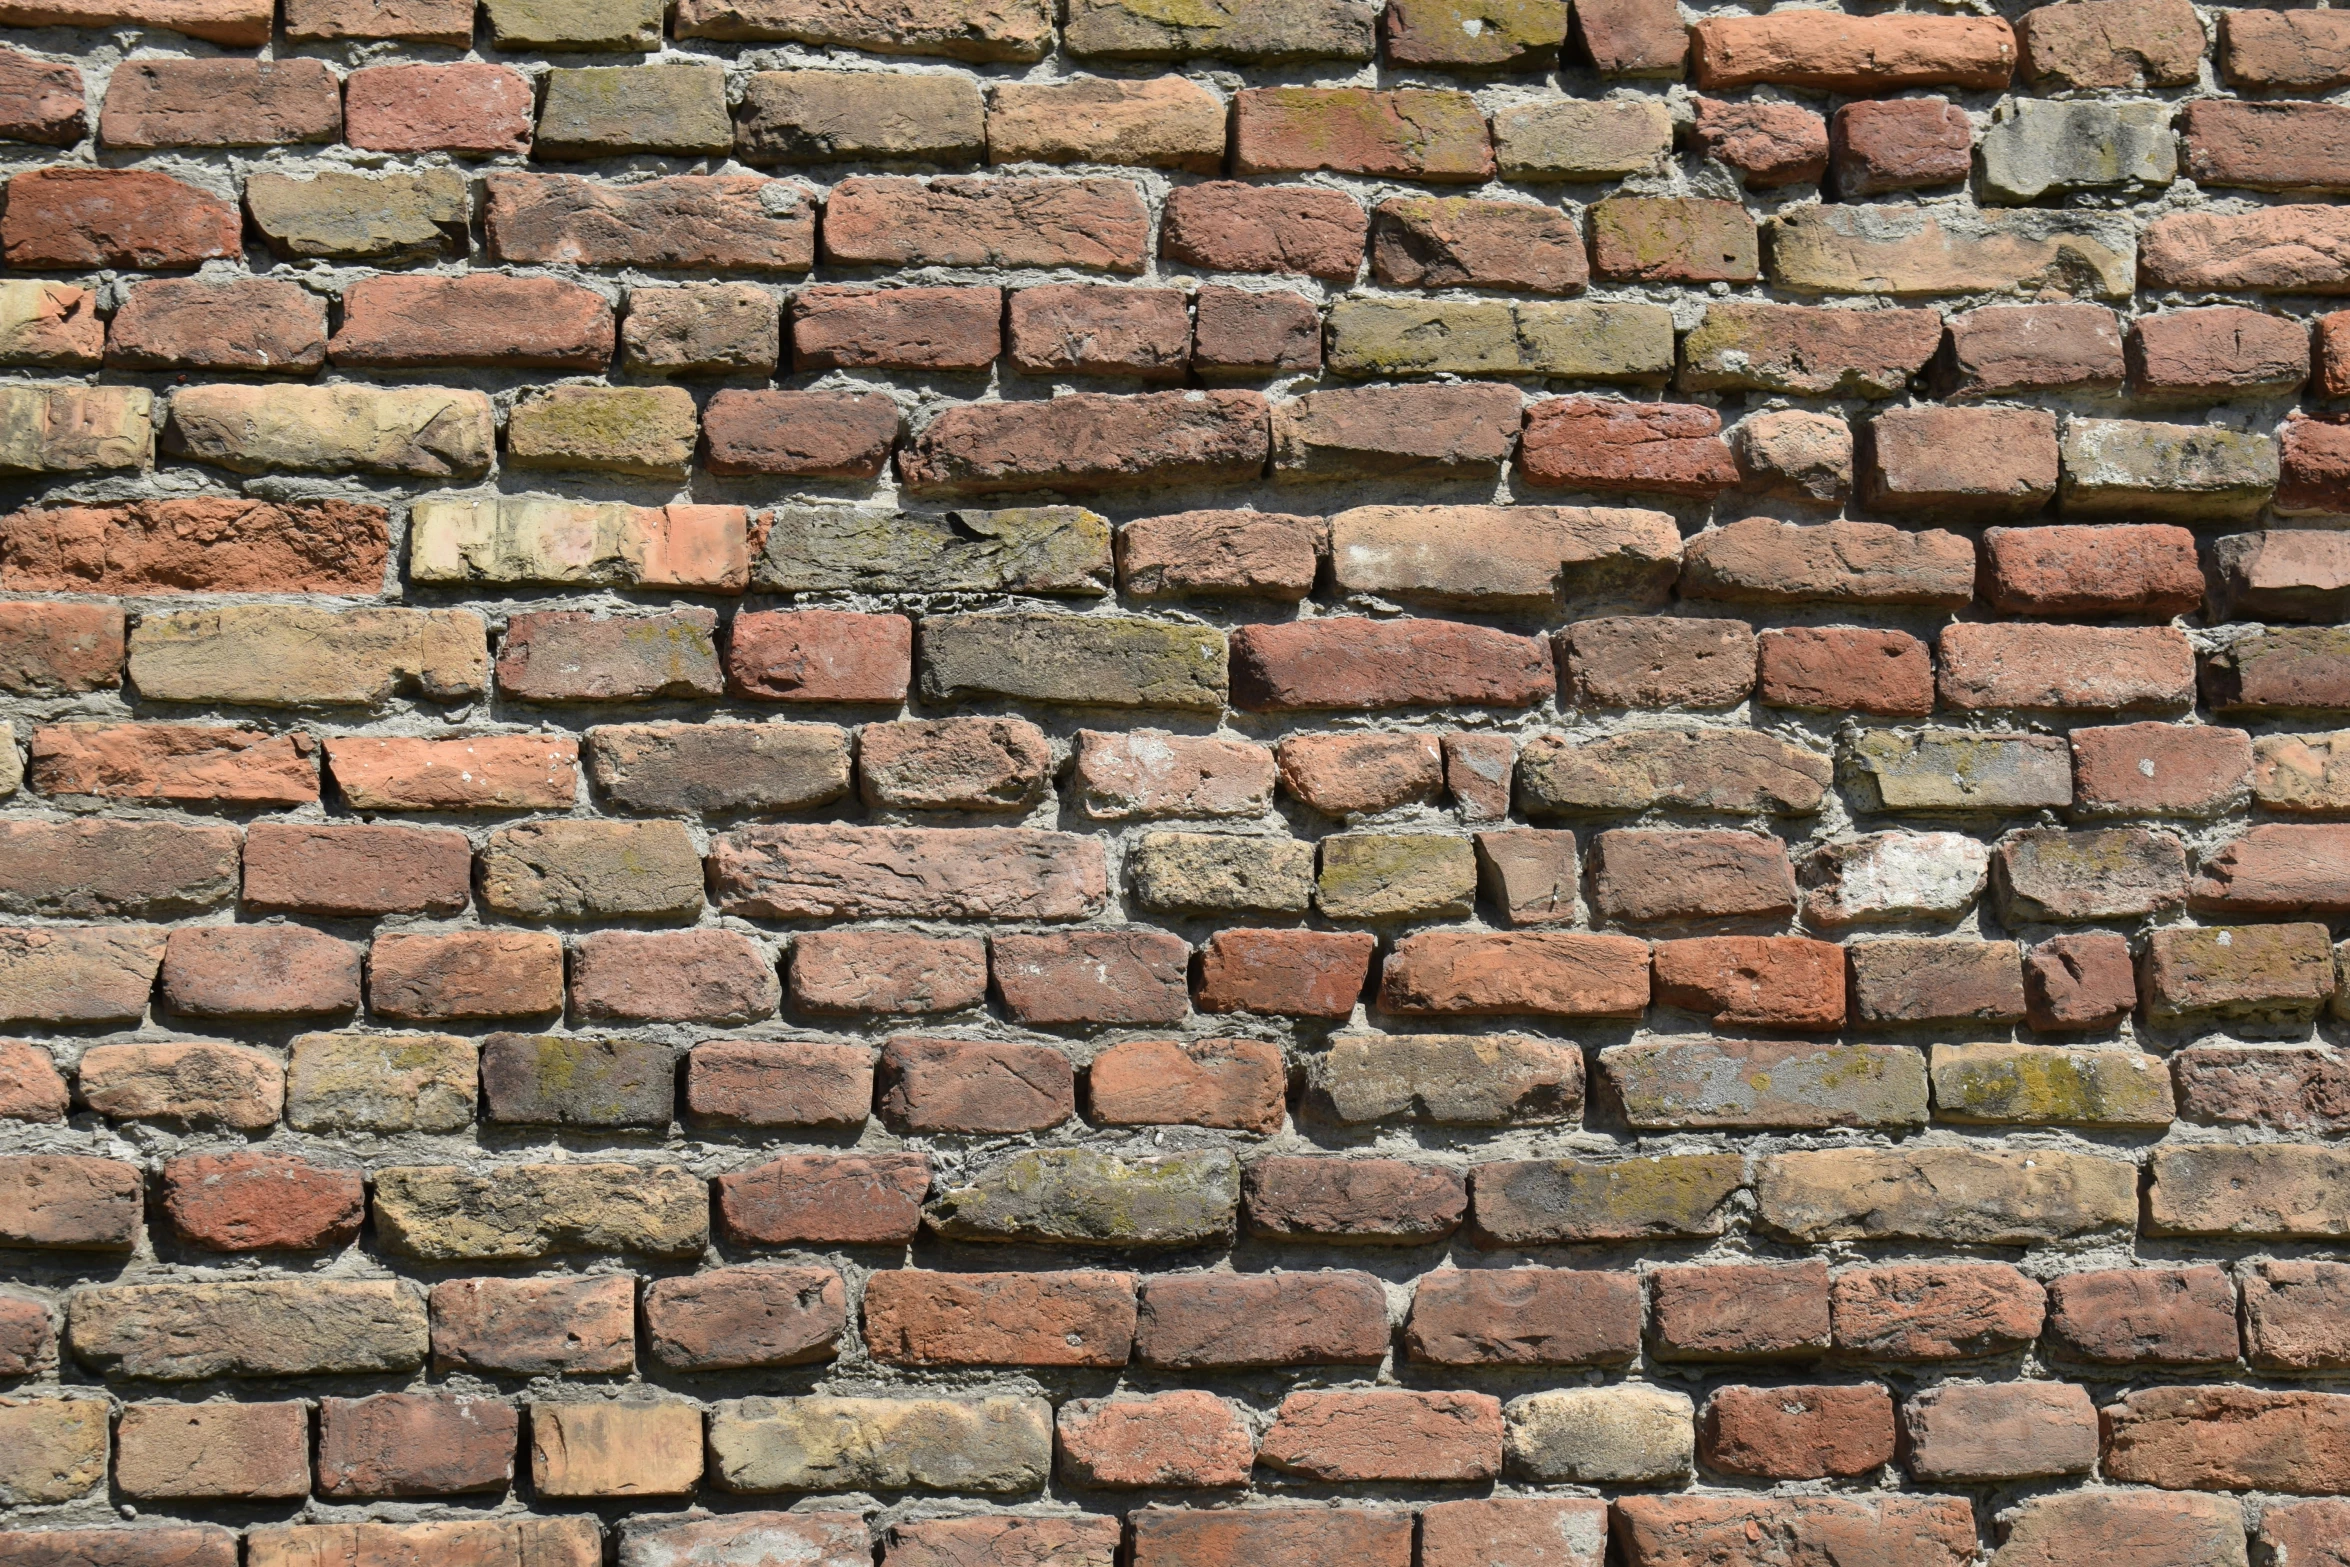 a close up s of a brick wall with a bird sitting on top